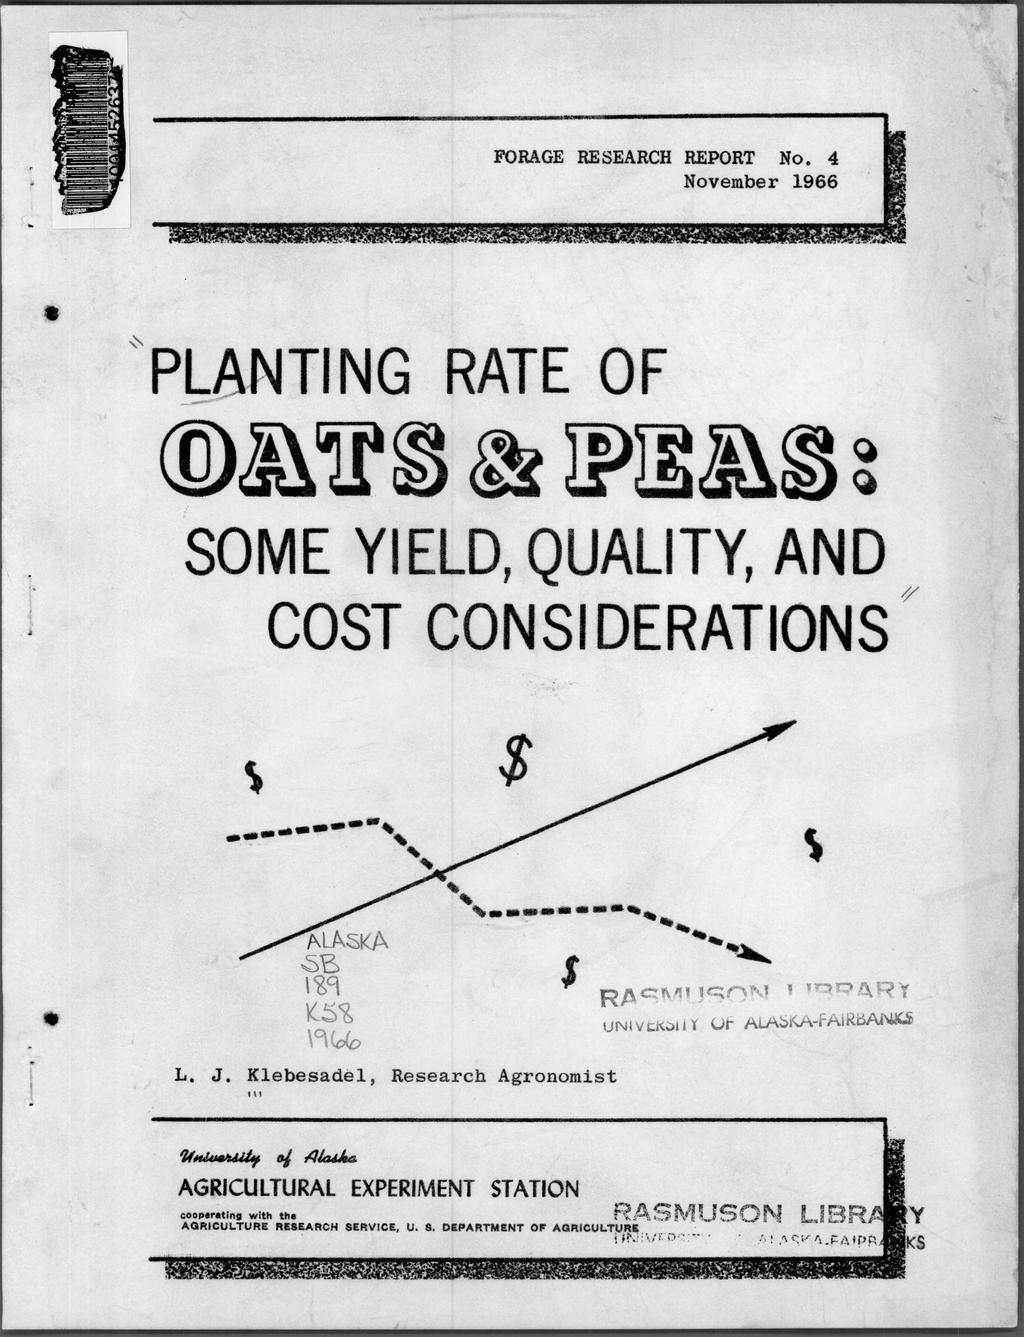 FORAGE RESEARCH REPORT No. 4 November 1966 x\ PLANTING RATE OF SOME YIELD, QUALITY, AND COST CONSIDERATIONS // Q> Q A L A S K A m K 5 ^ 1 jqr\m?